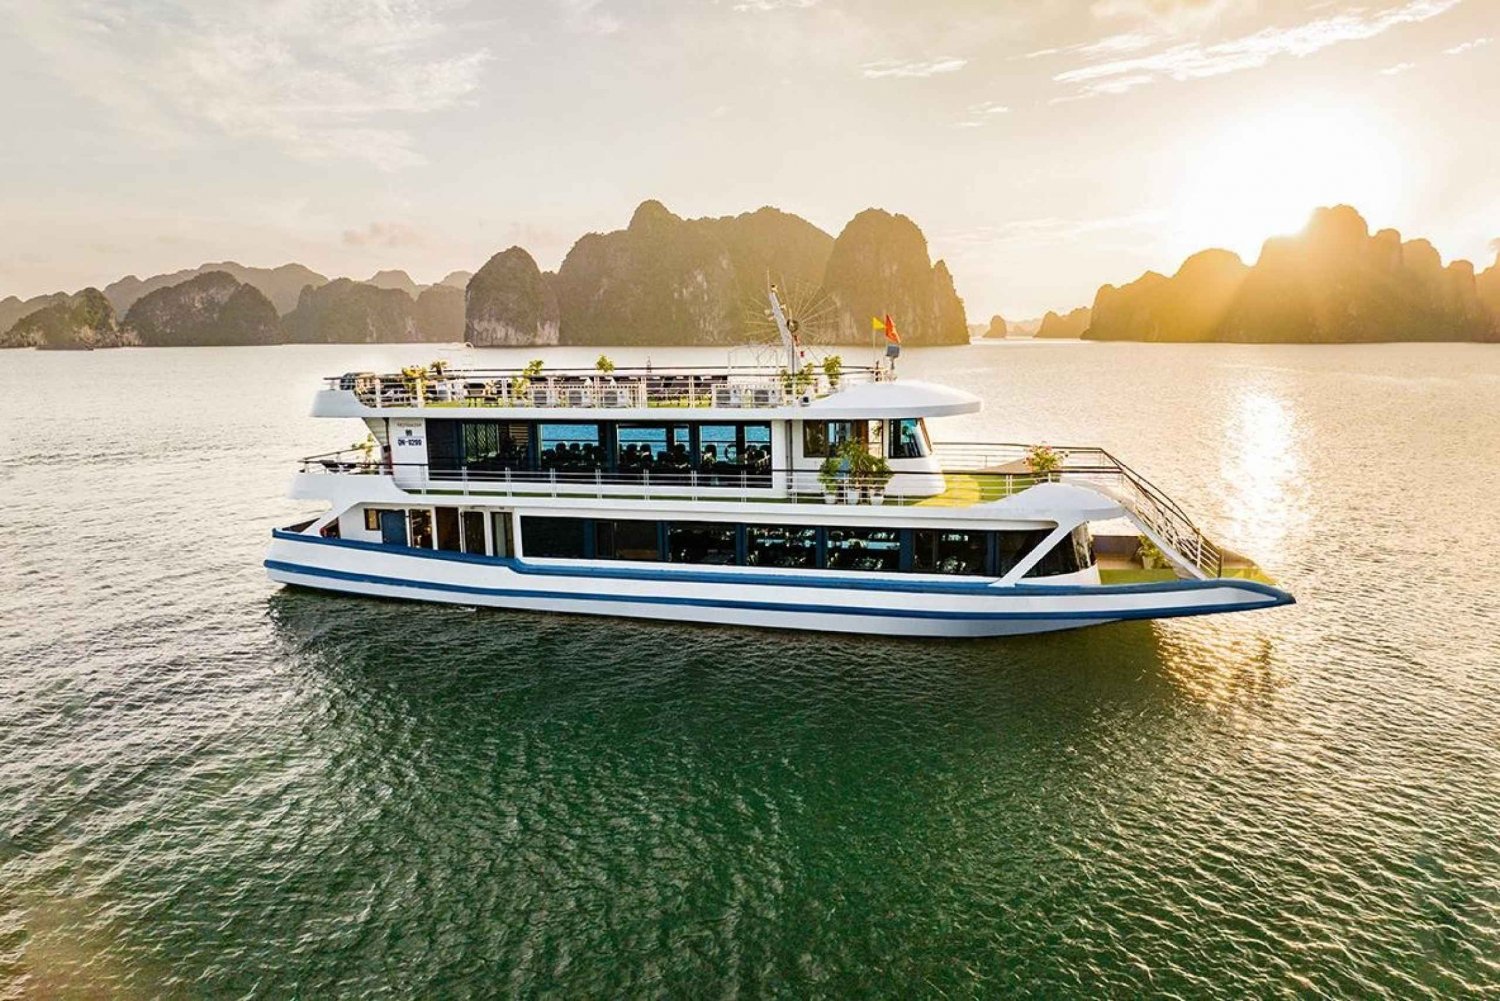 From Hanoi: 1 day Halong Bay Cruise Tour with Limousine Bus